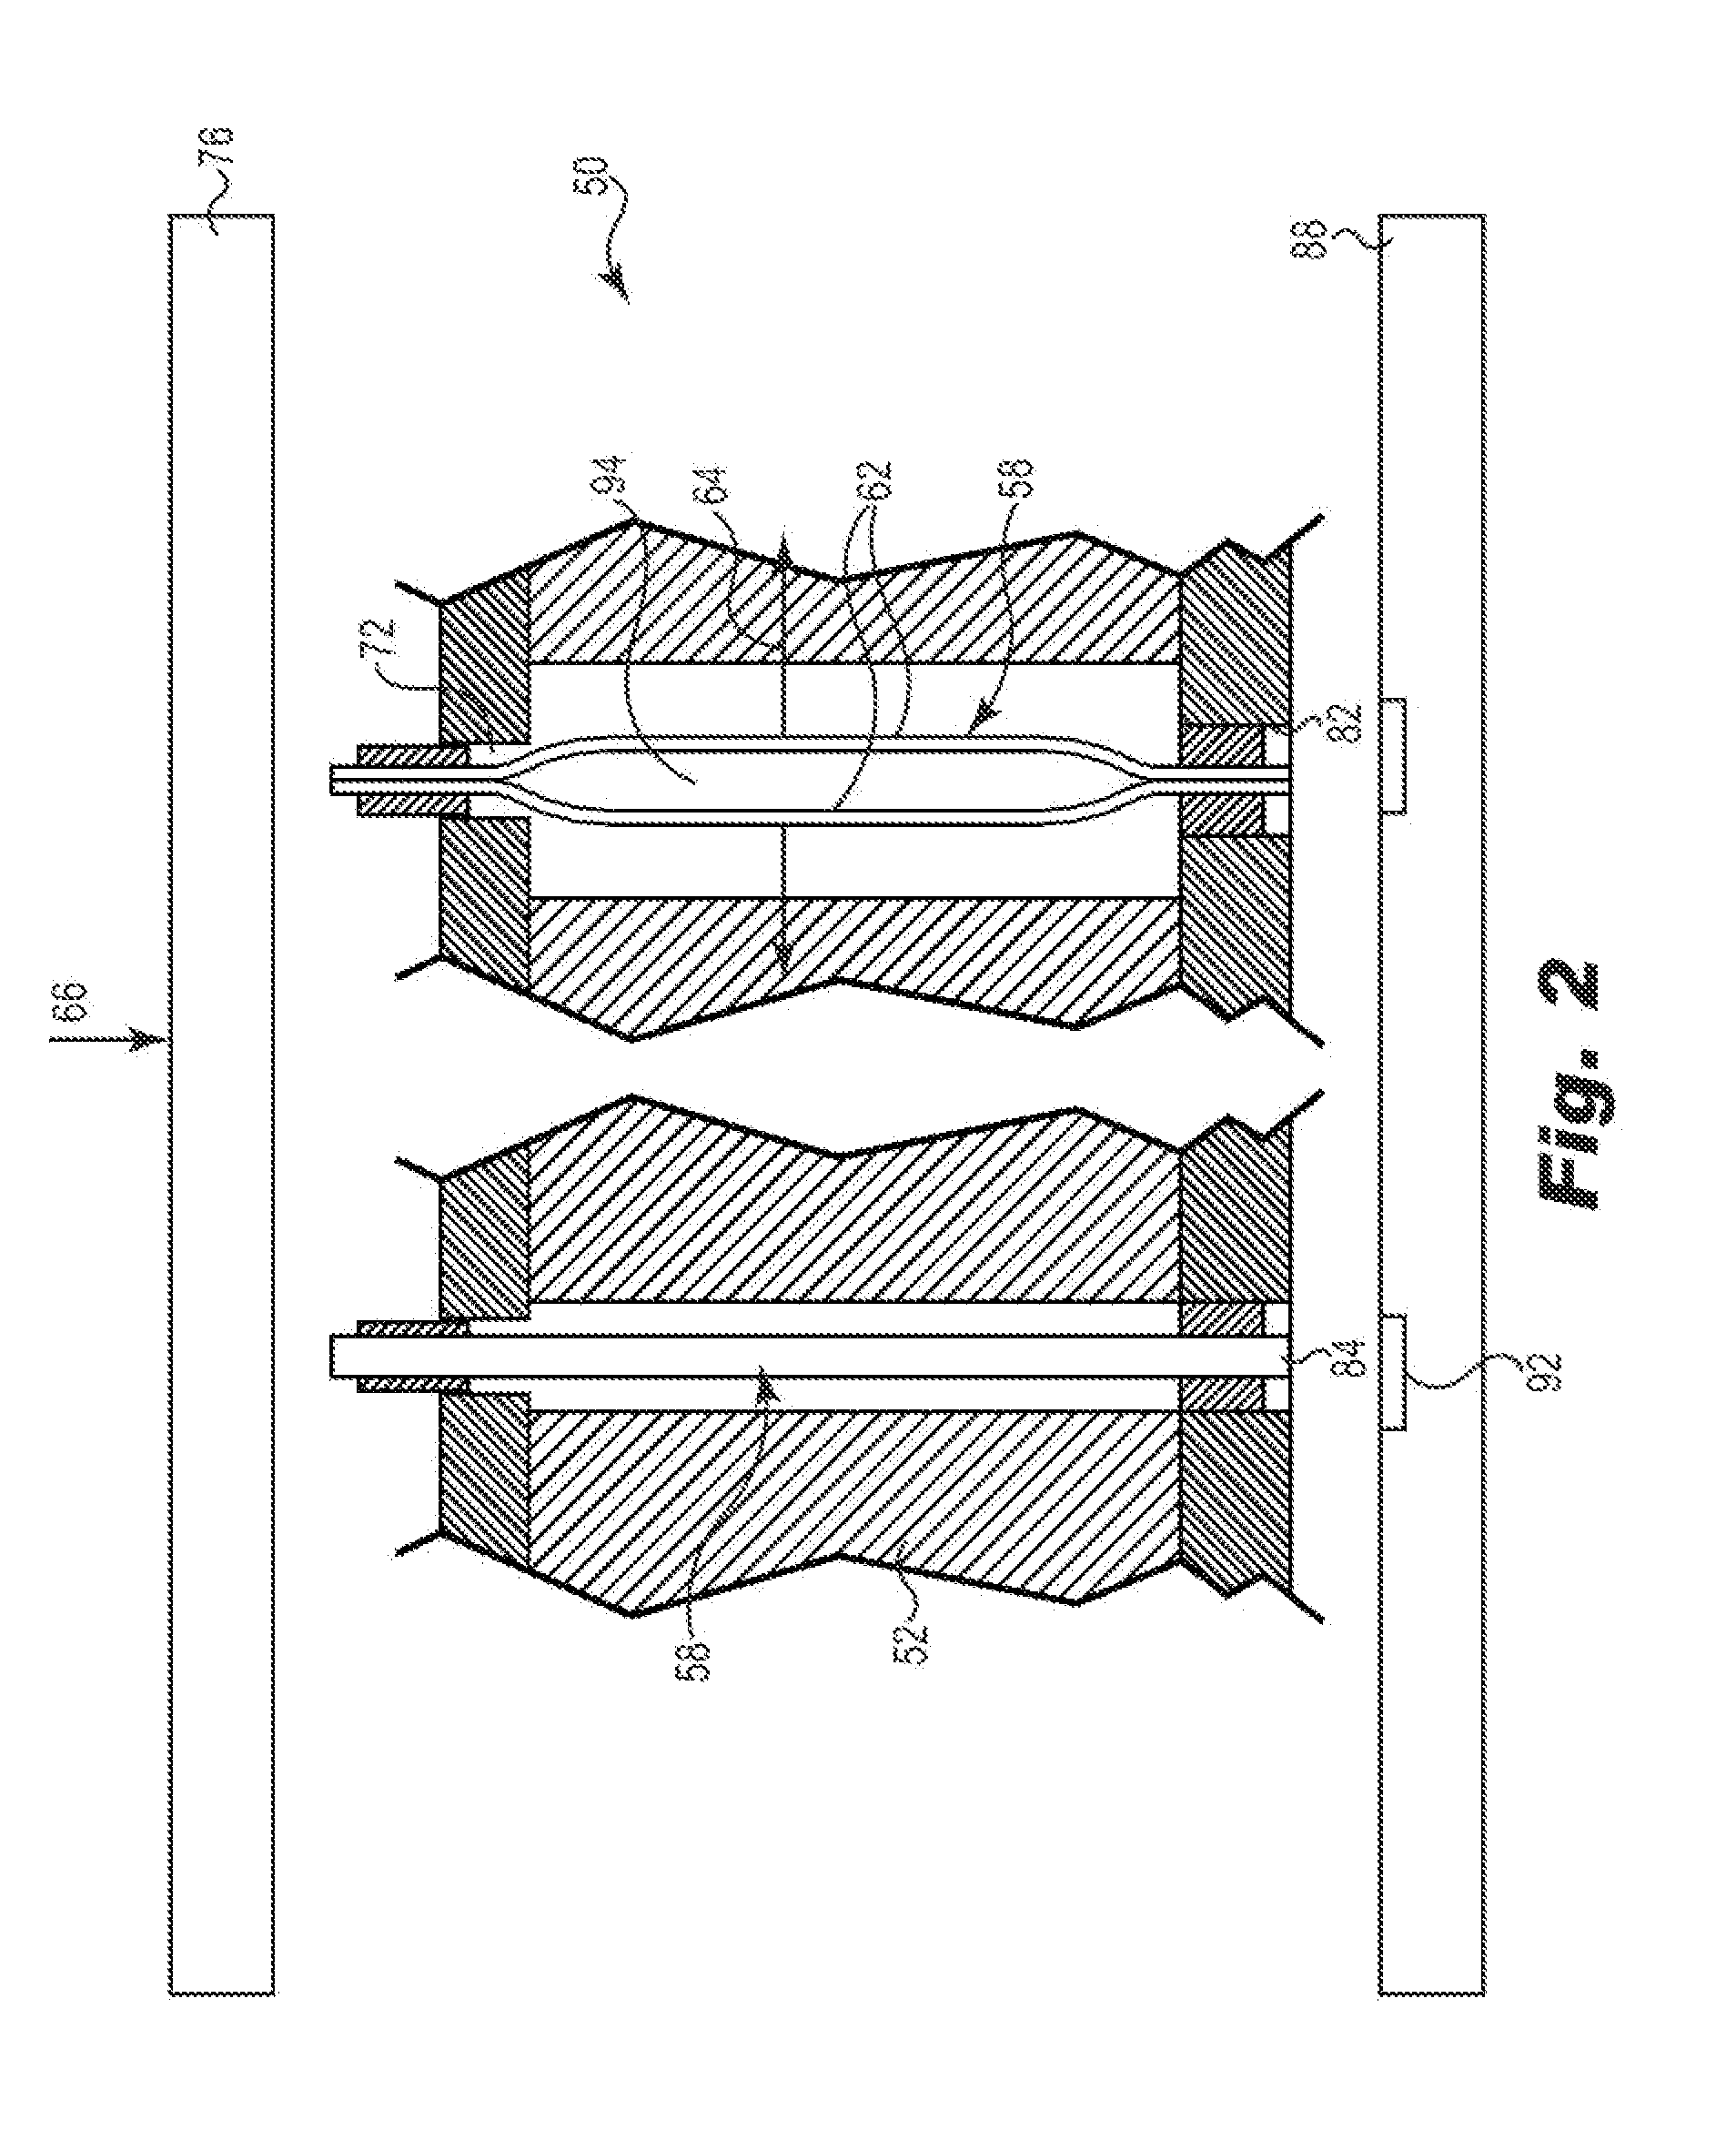 Electrical interconnect IC device socket